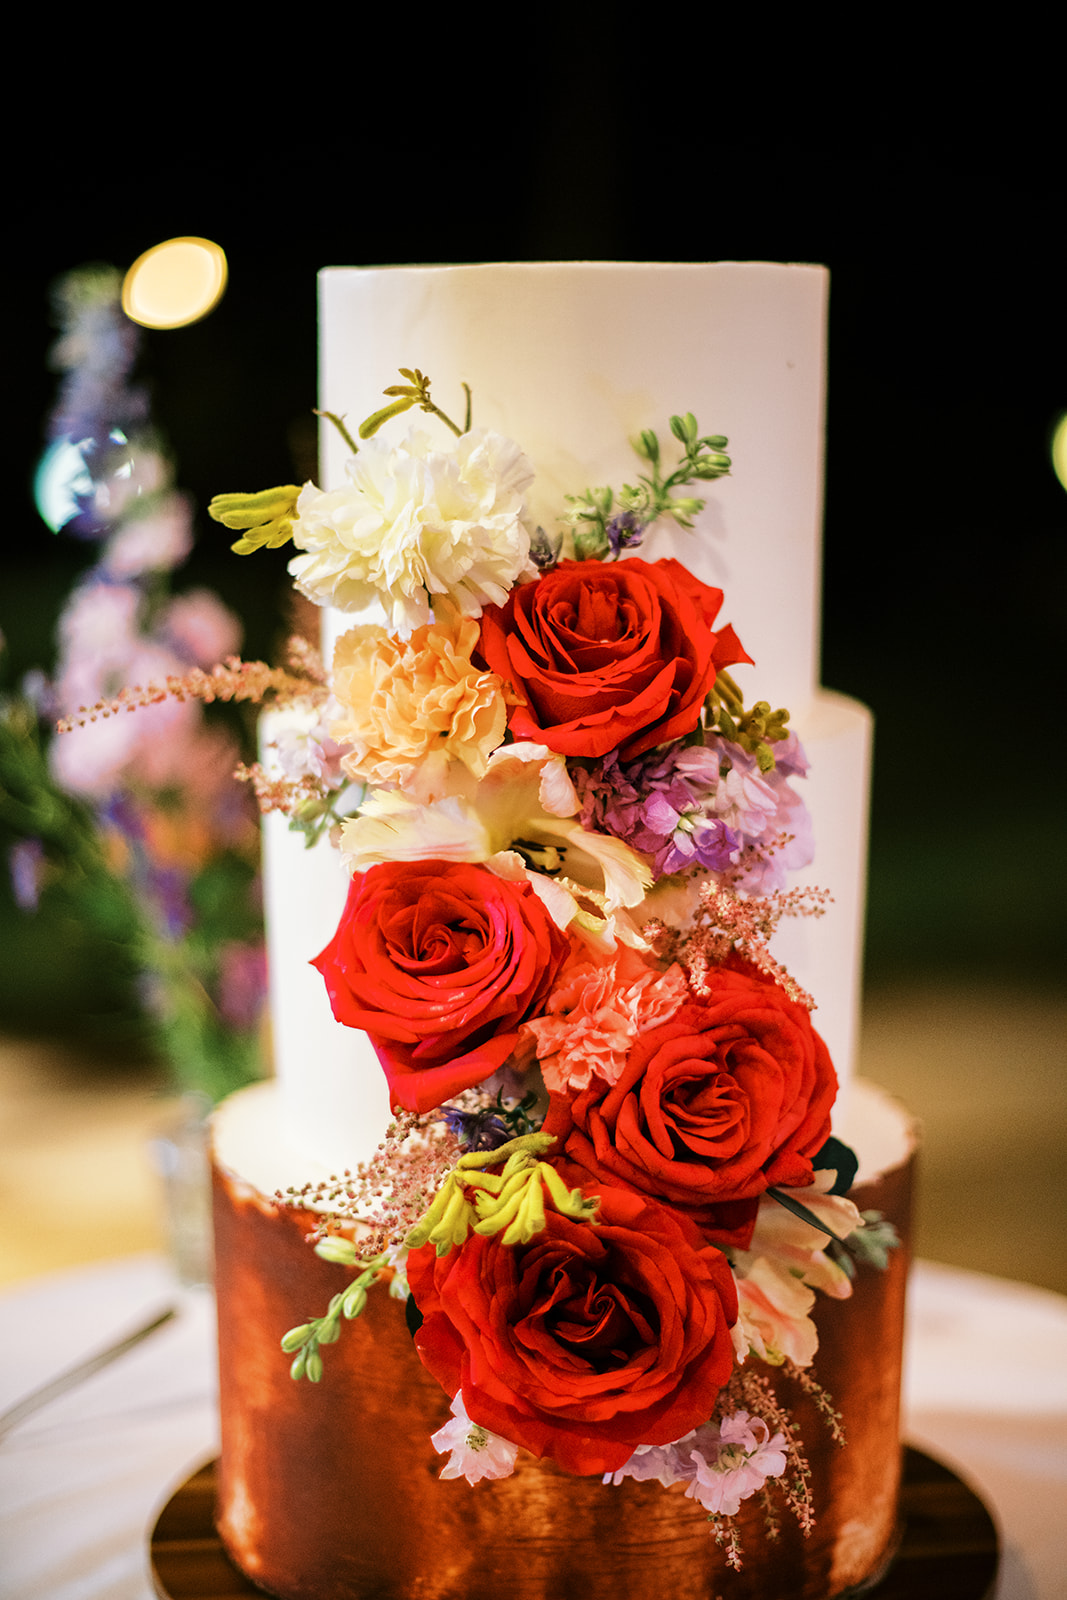 Three-tiered wedding cake adorned with red roses and assorted flowers captured by Megan Moura Wedding Photographer